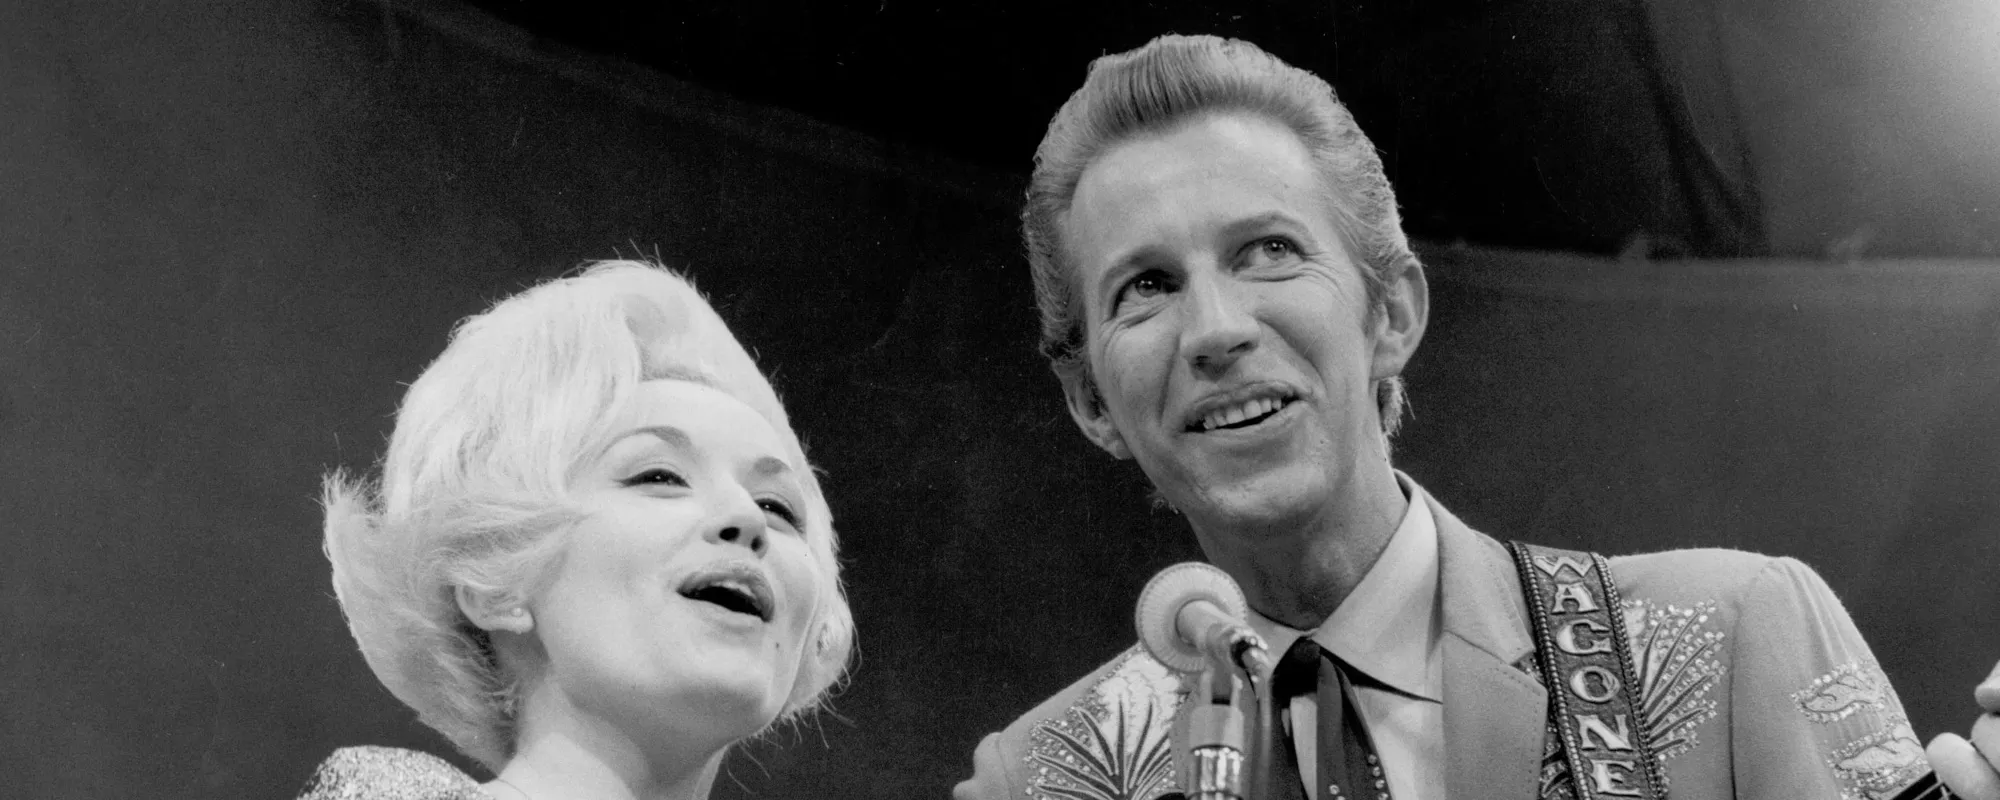 The “Always” Love Between Dolly Parton and Porter Wagoner